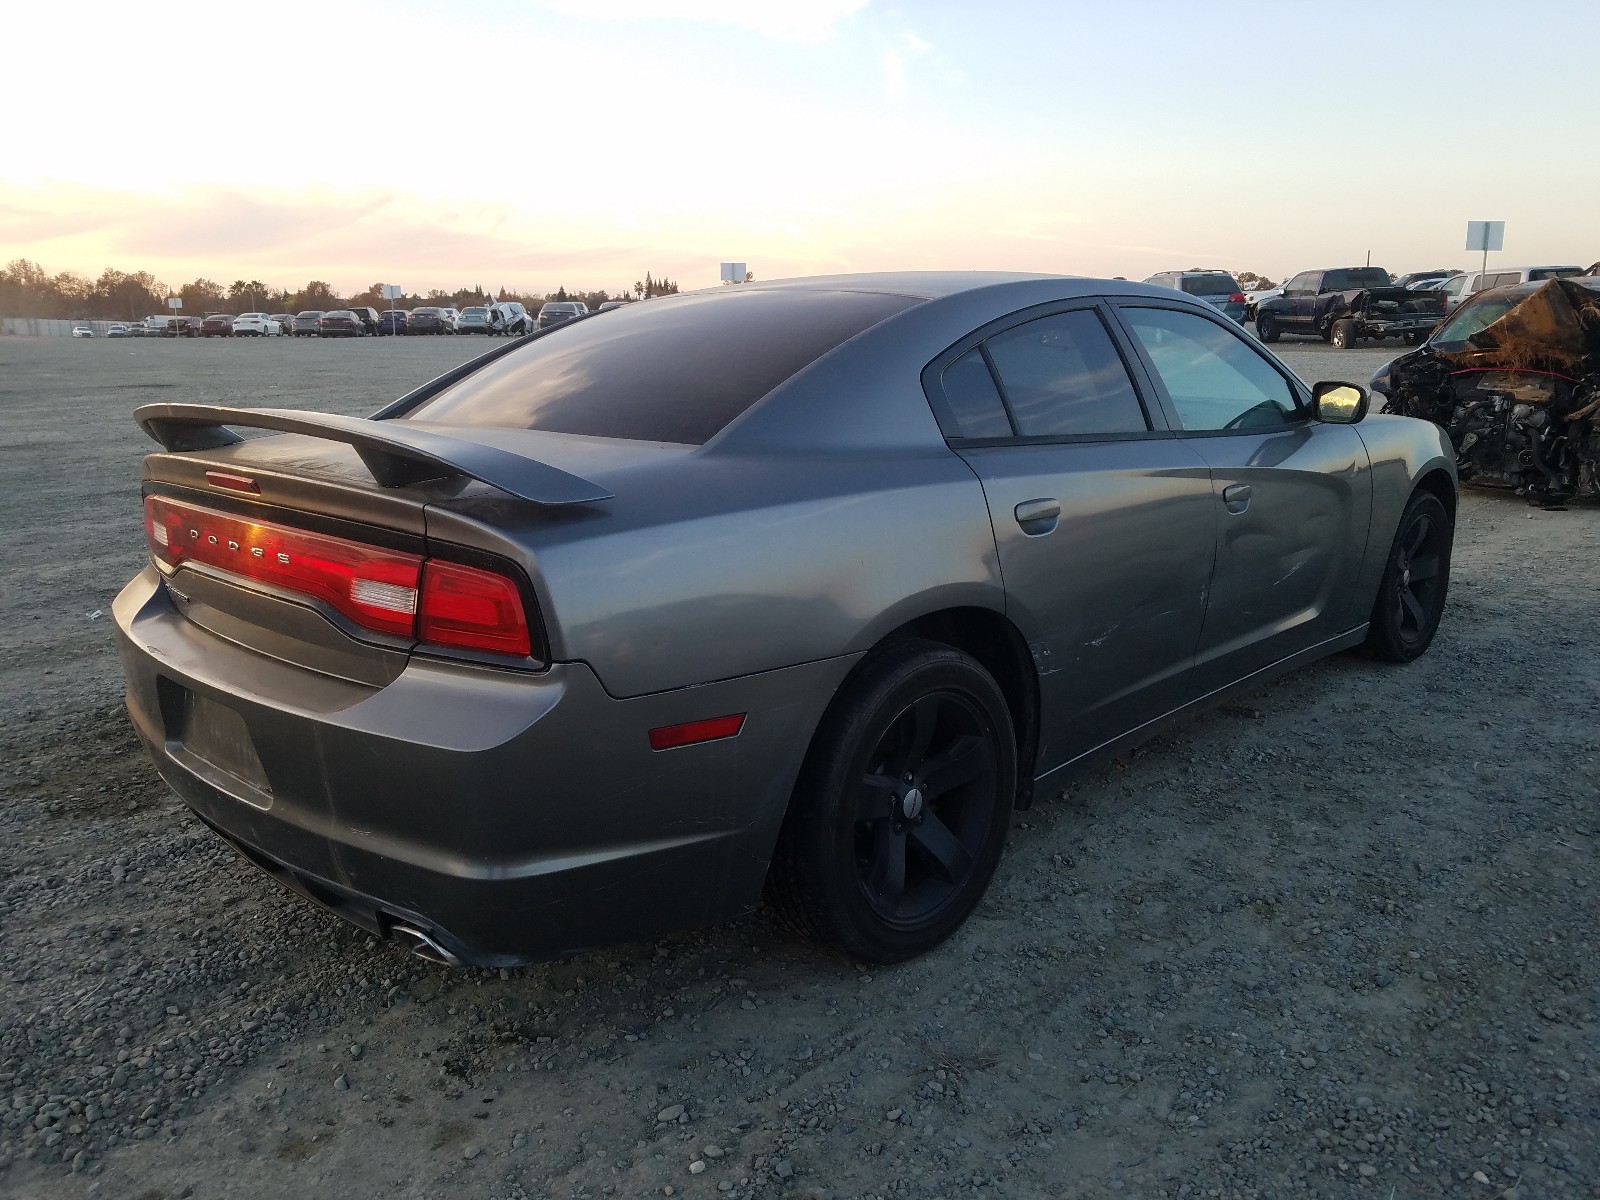 VIN: 2B3CL3CG5BH607025 DODGE CHARGER 2011